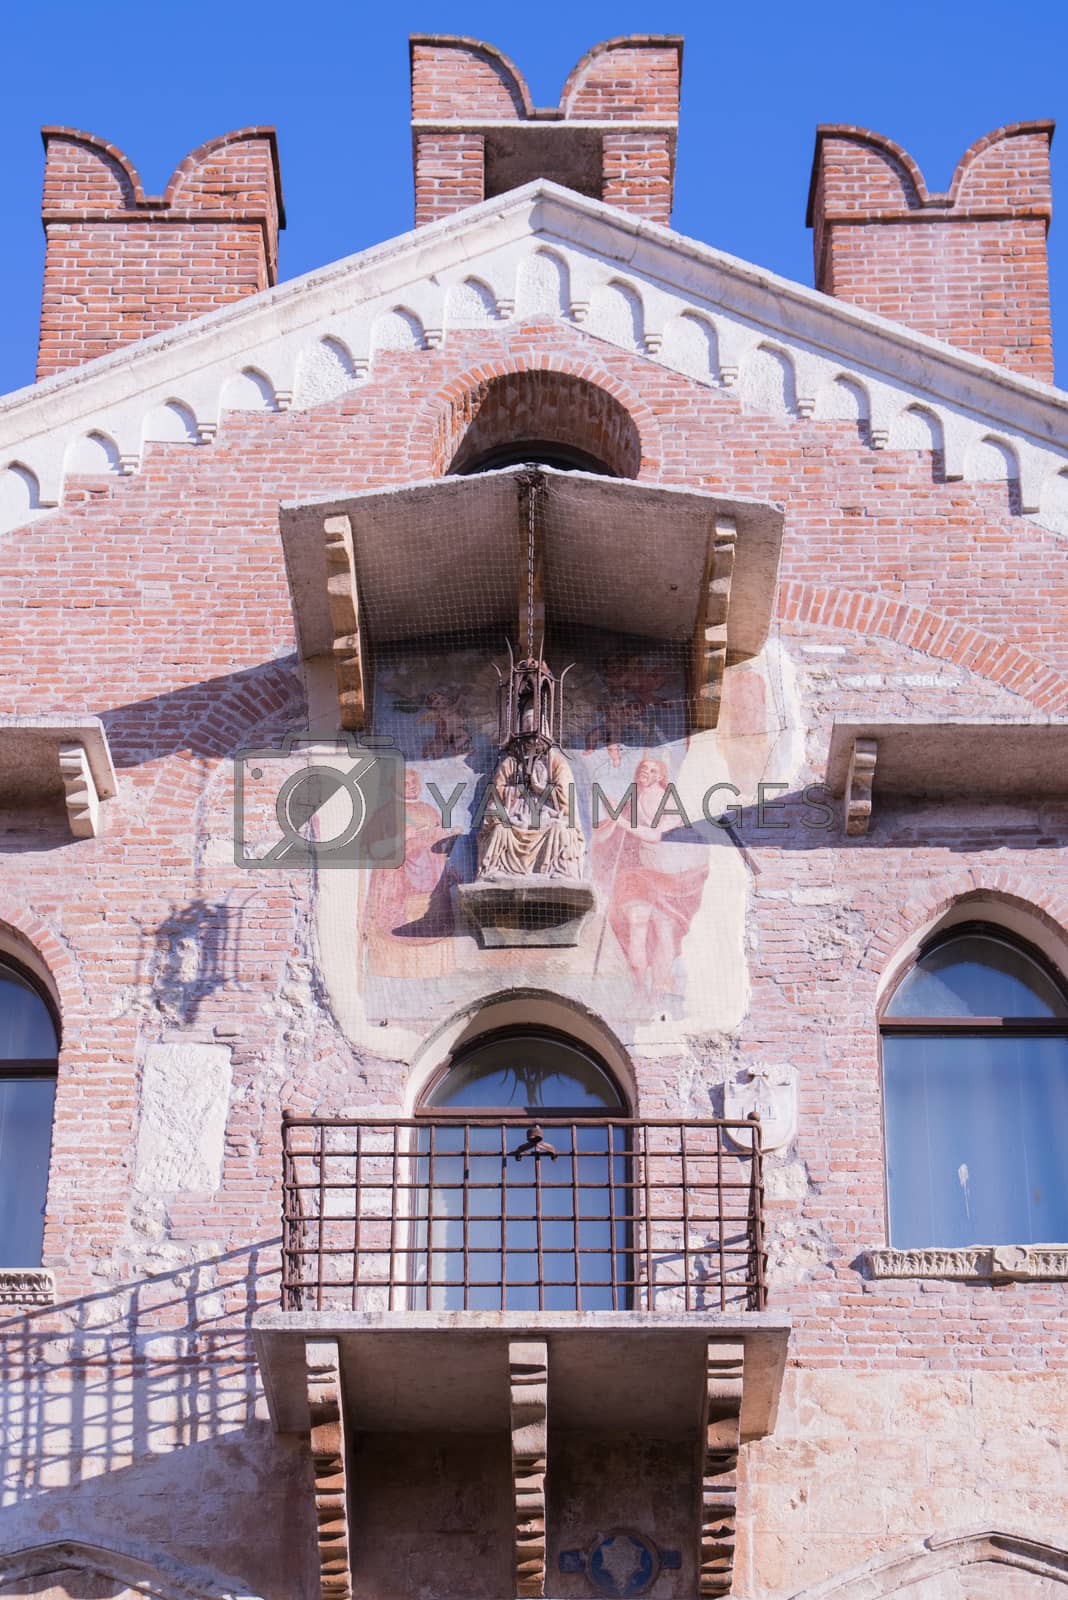 Royalty free image of The Palace of Justice in the center of Soave, Italy. by Isaac74